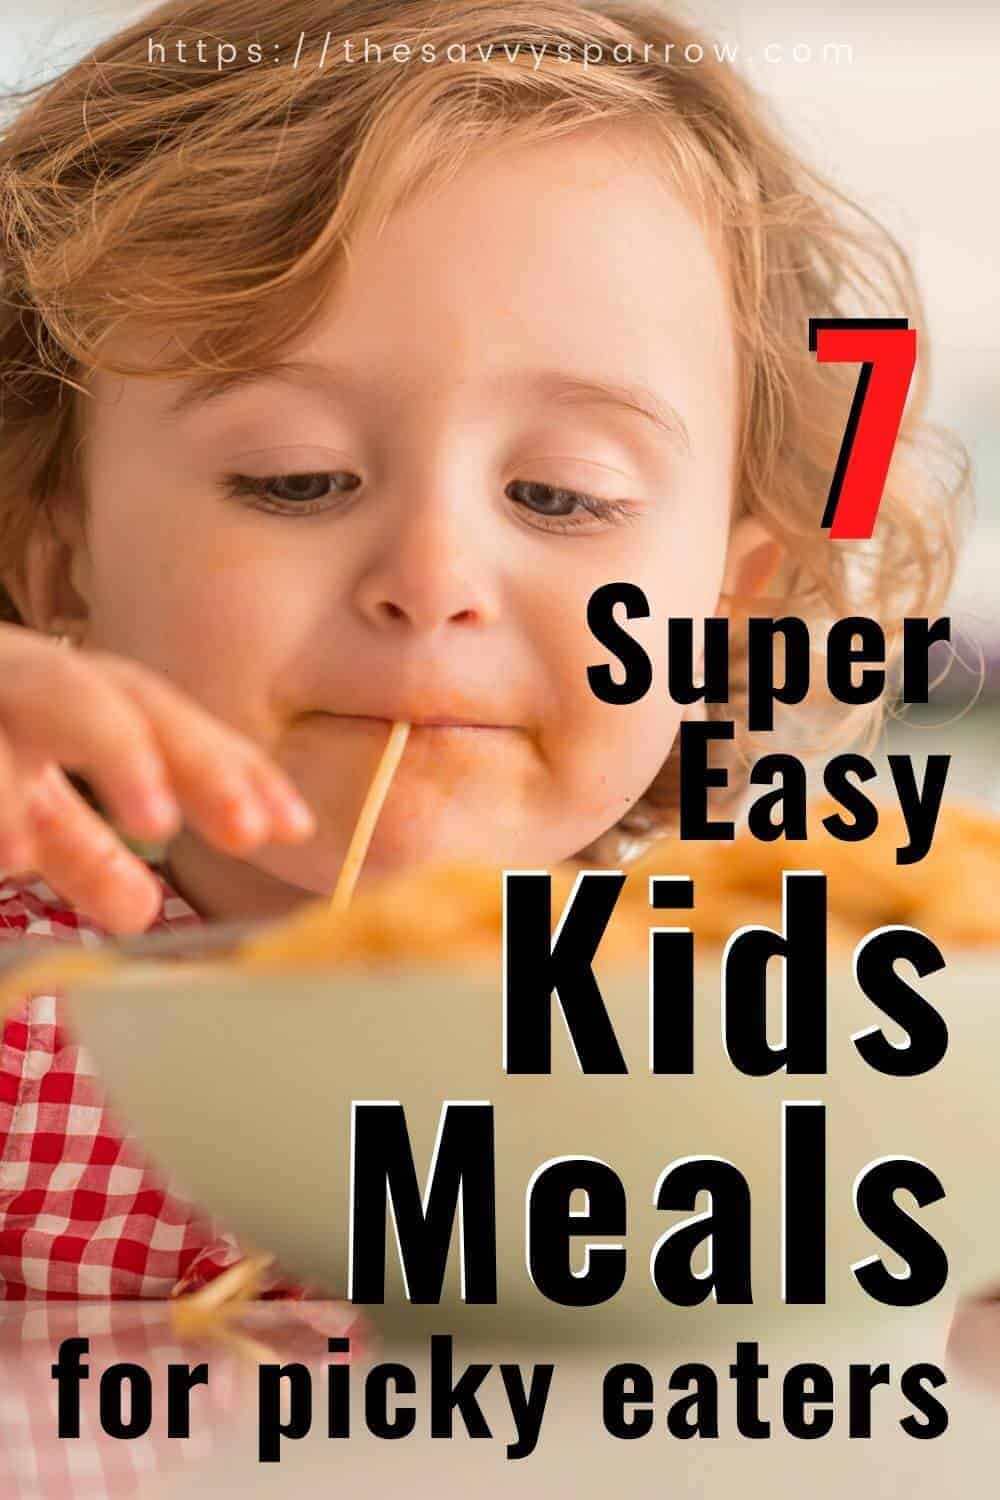 Easy kids meals for picky eaters!